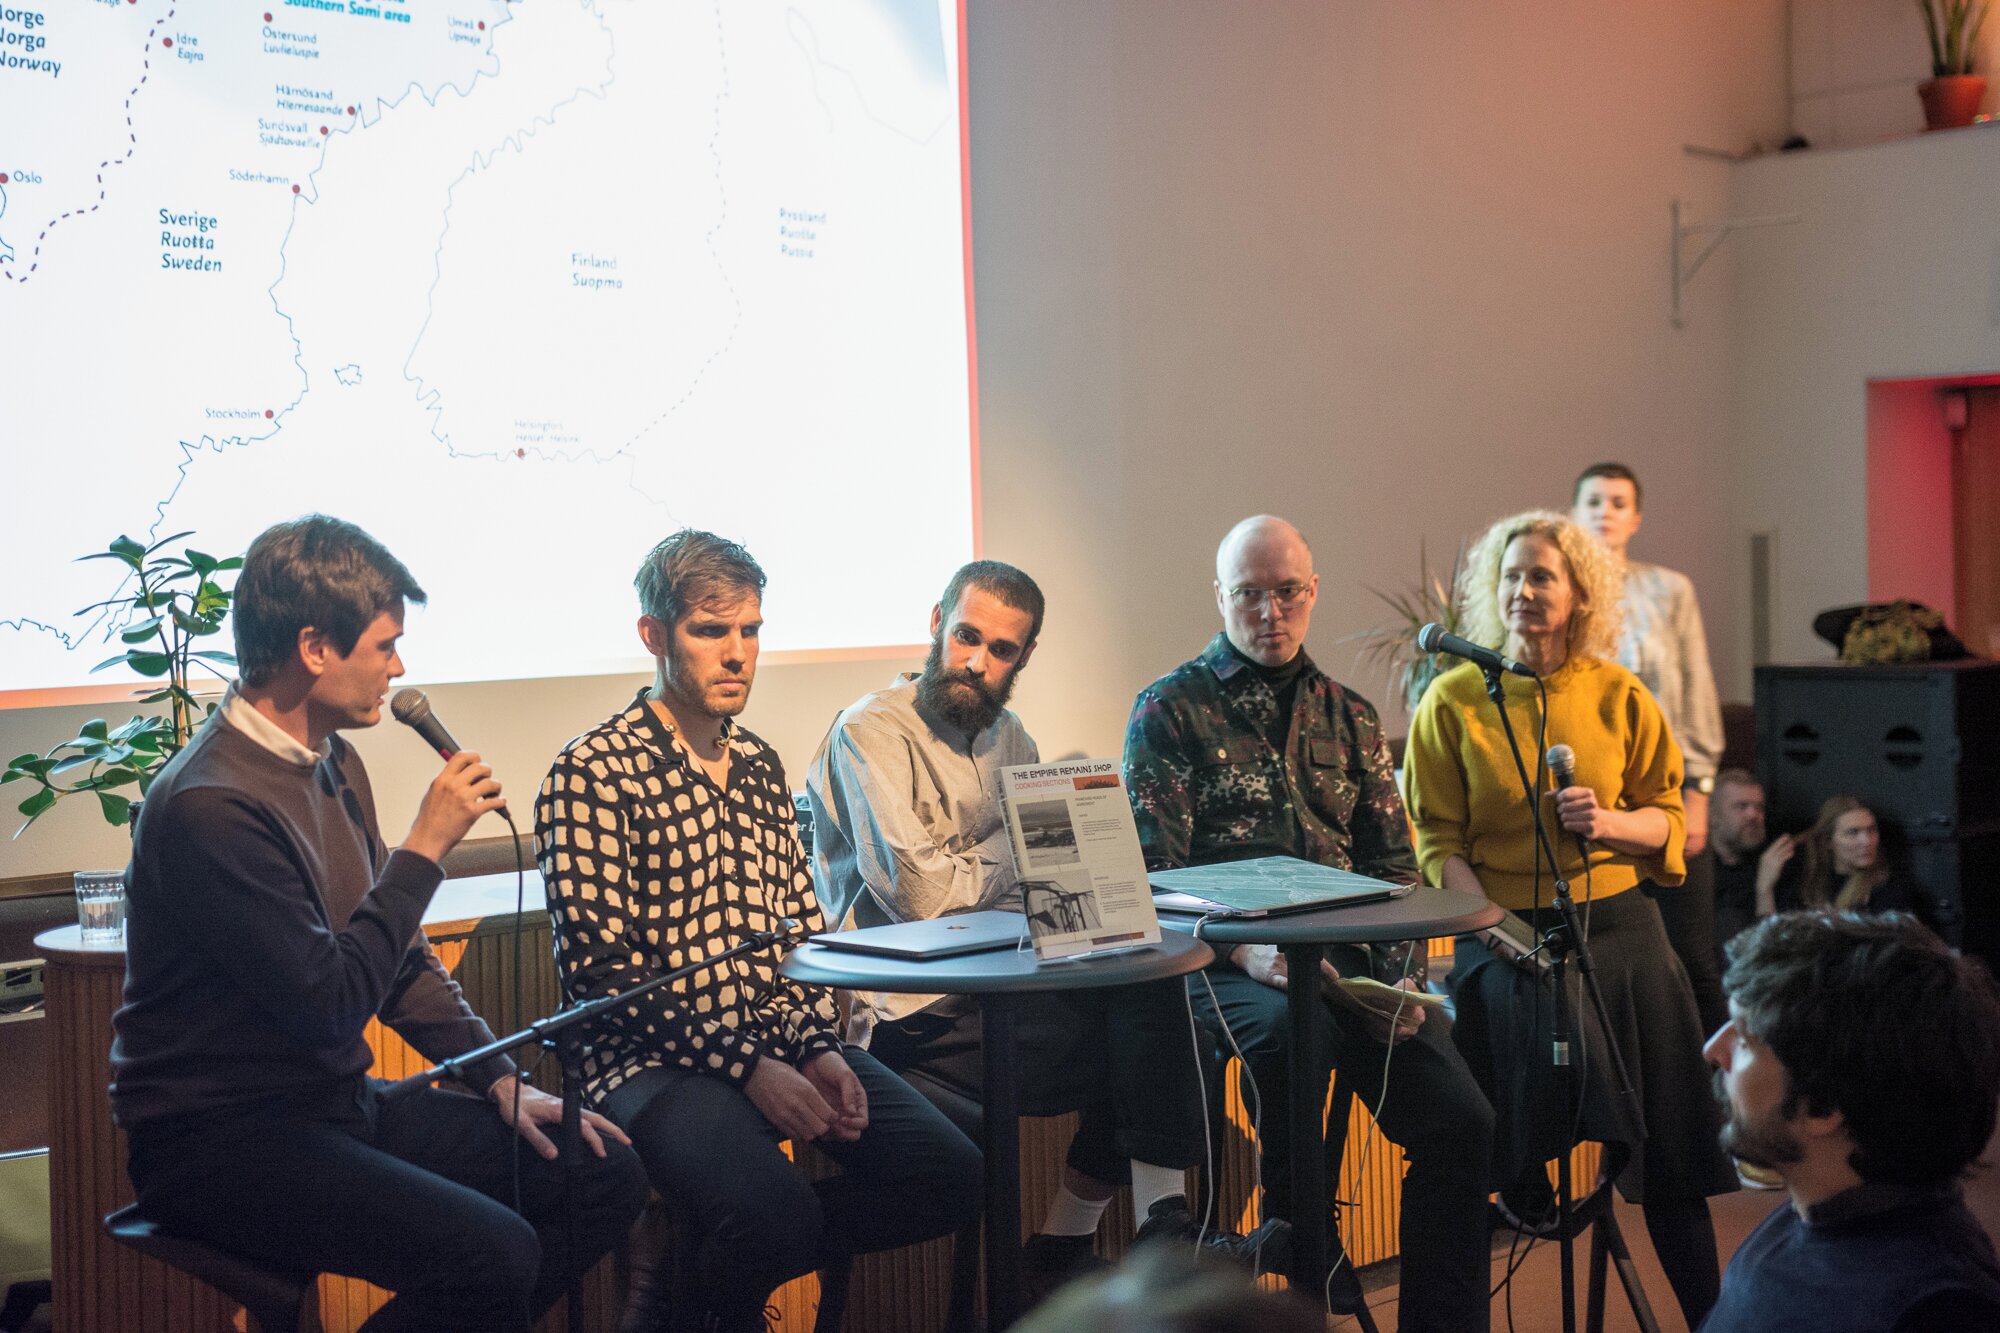 Final panel debate at Bergen Kunsthall moderated by curator Charles Aubin, including Cooking Sections (Daniel Pascual and Alon Schwabe) Kristoffer Dolmen director of the Sami Center for Contemporary Art and Tone Hansen, director of Henie Onstad Art Center. 